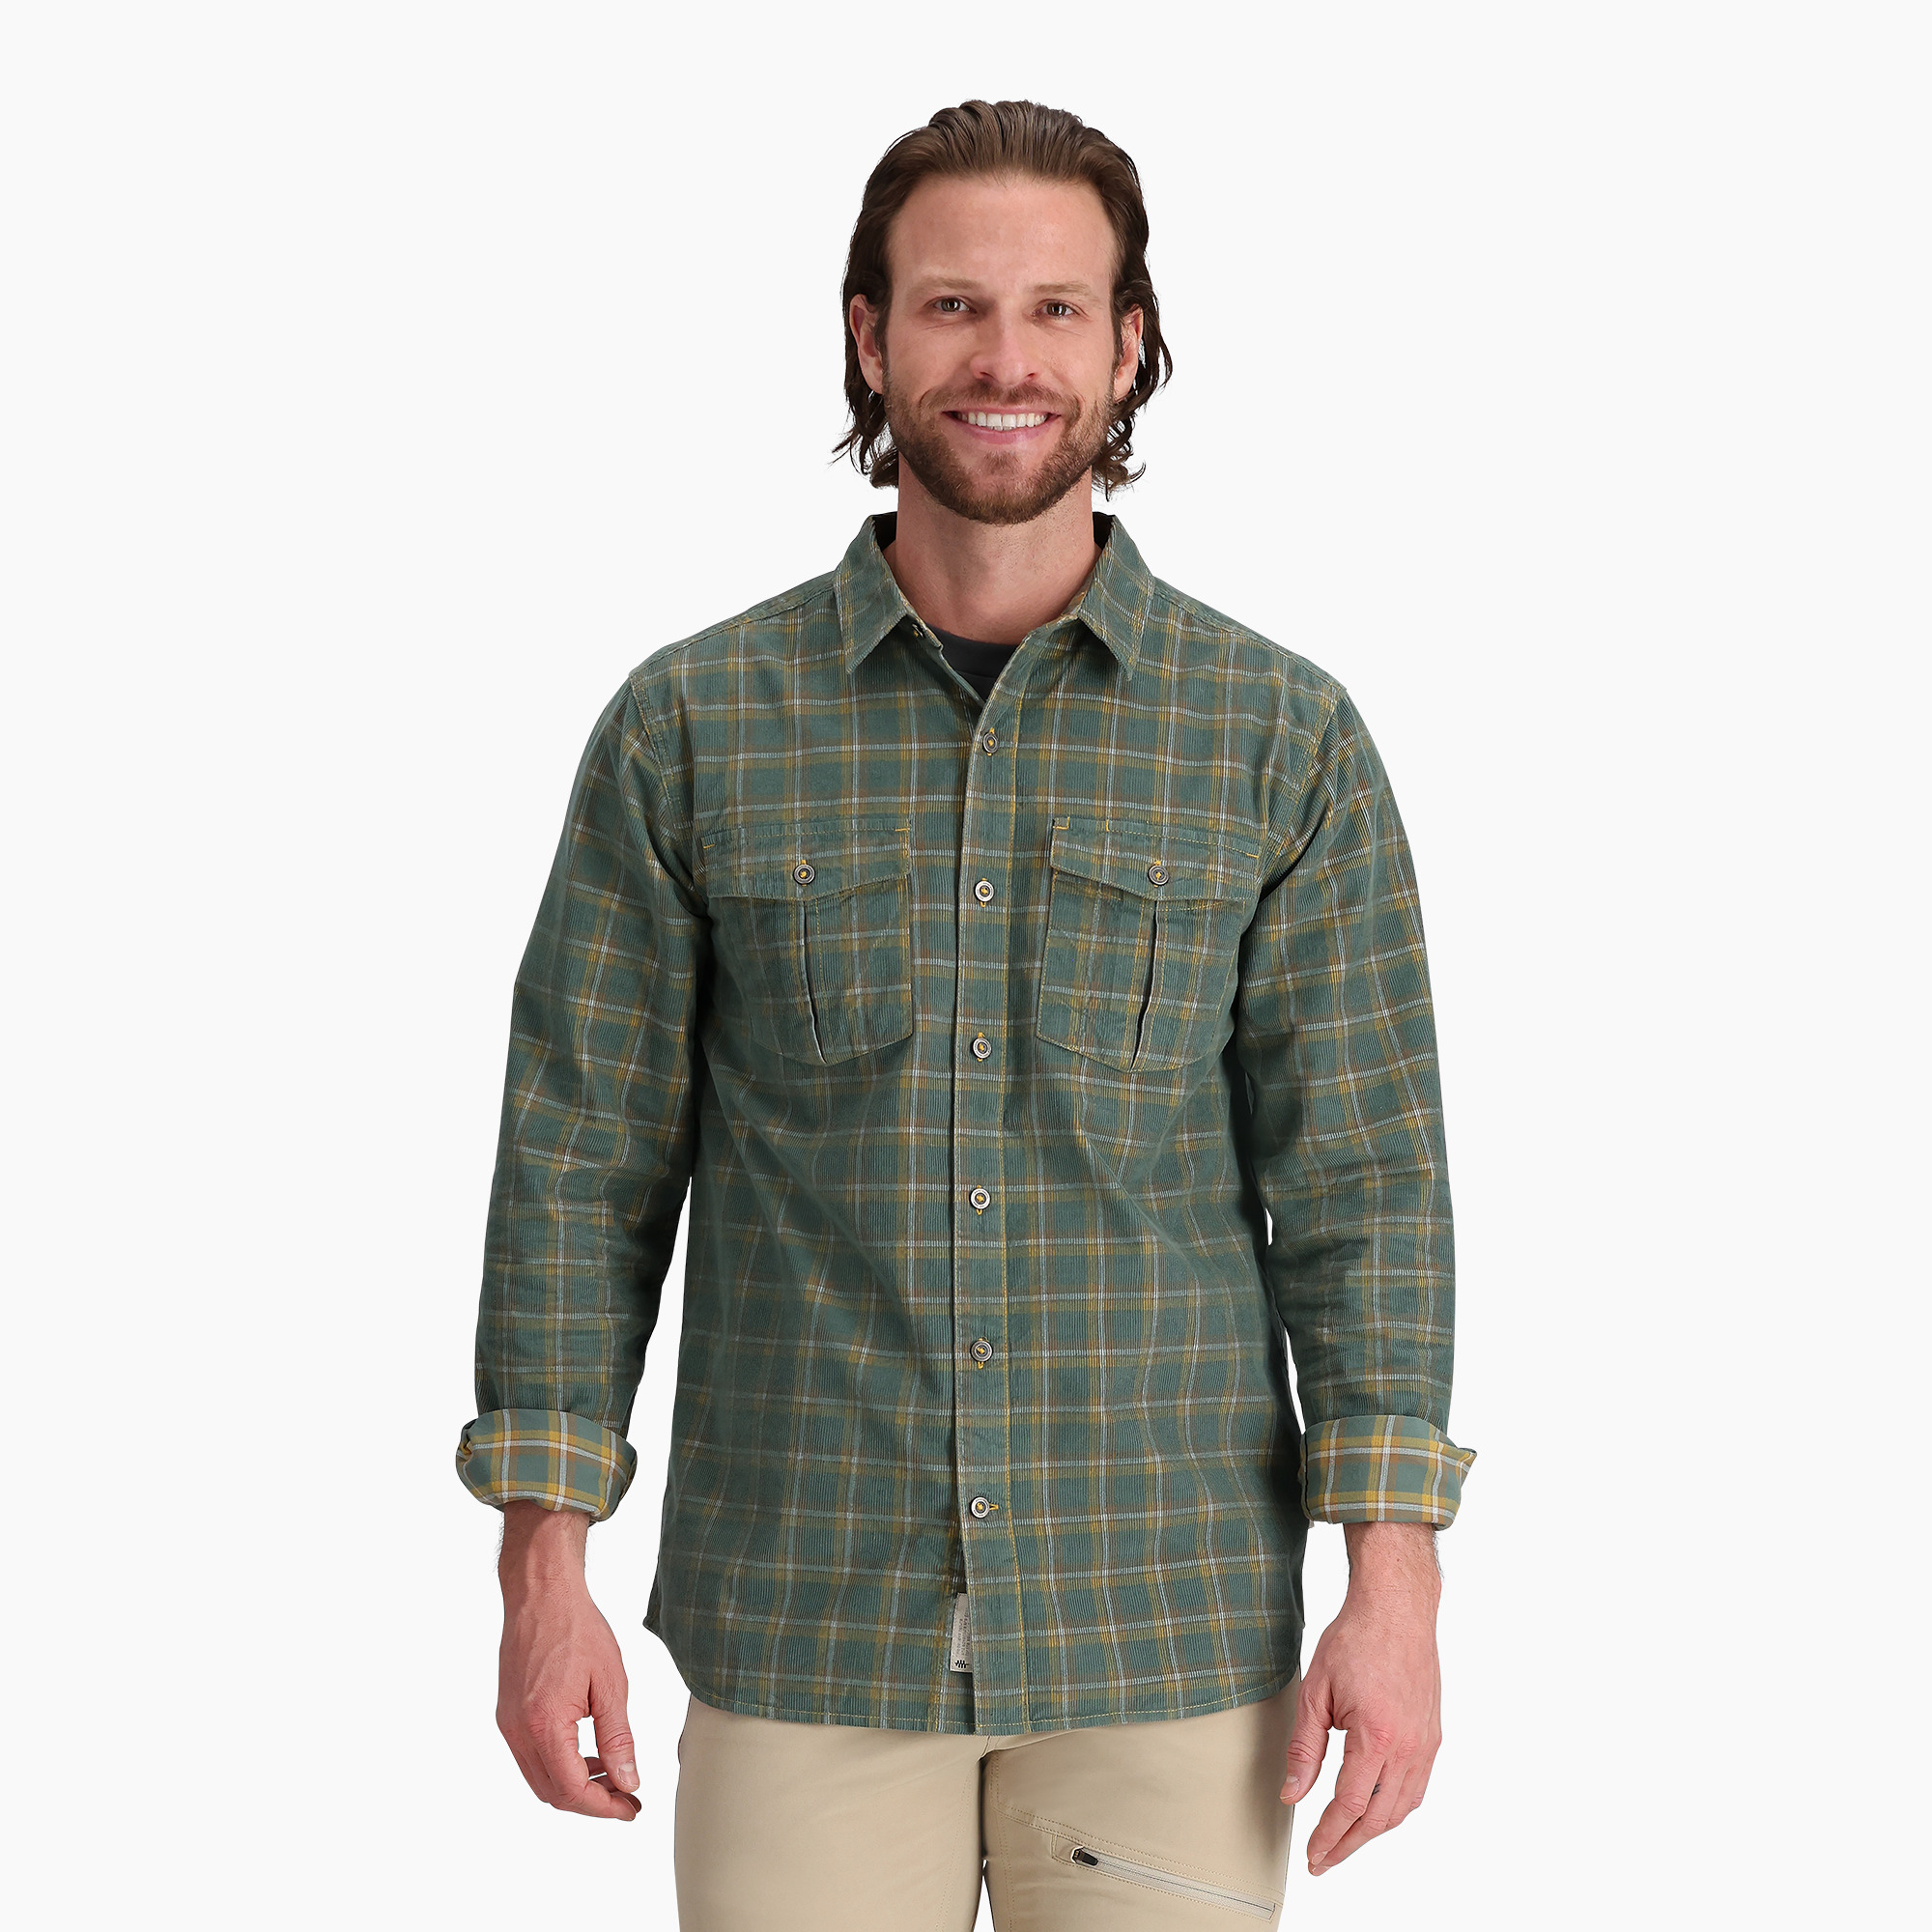 Royal Robbins clothing collections for men